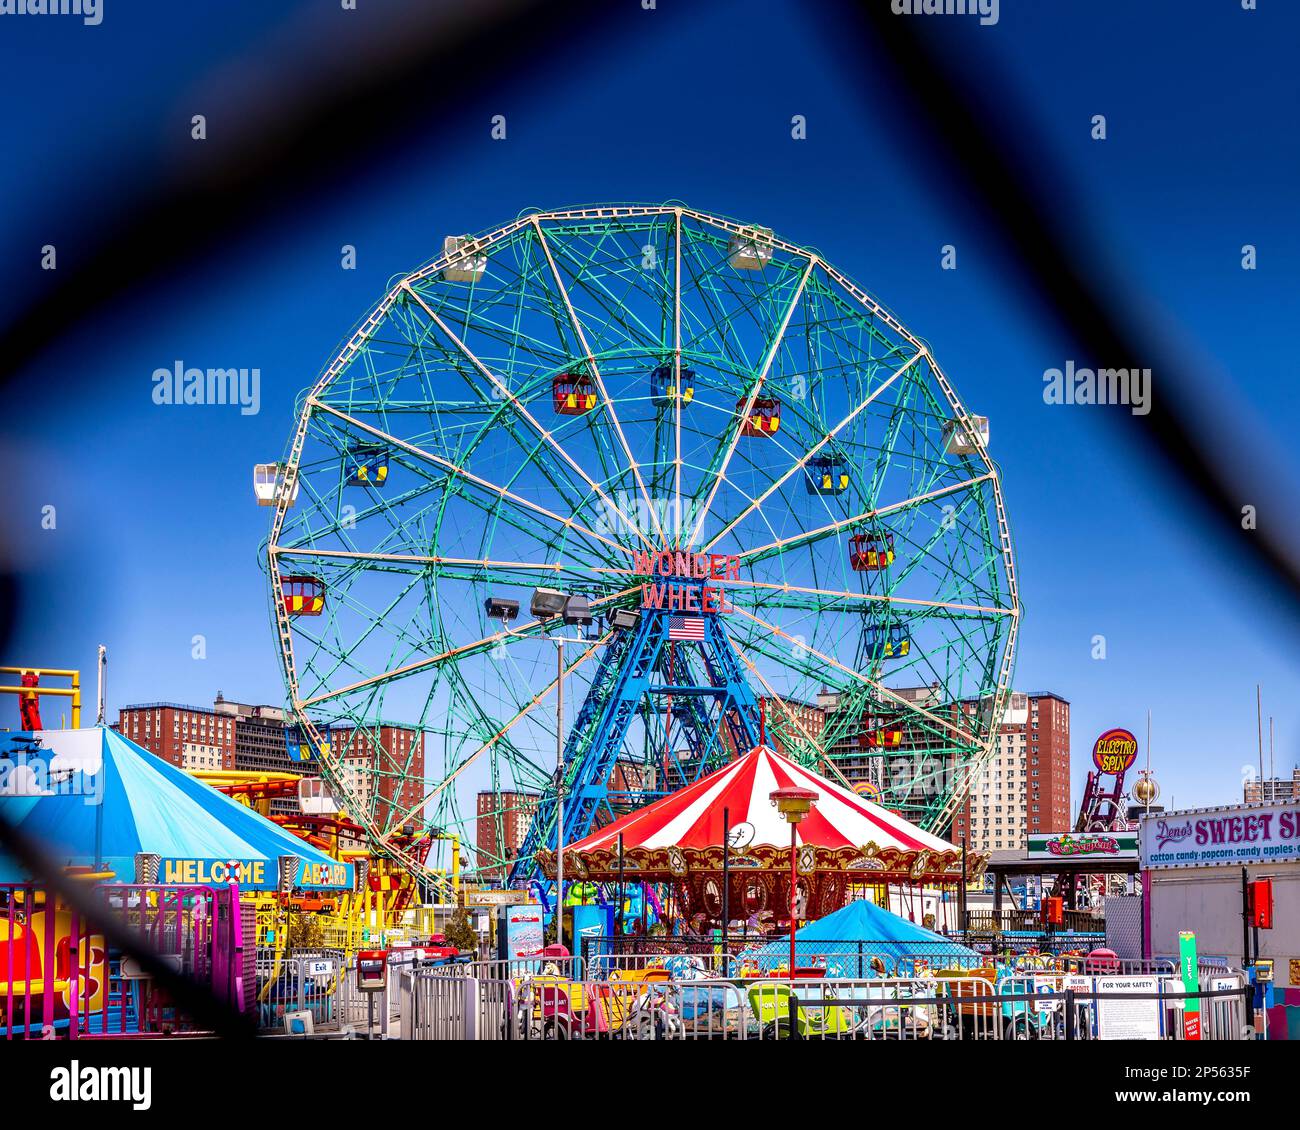 Coney Island, USA - April 28, 2022: The famous Wonder Wheel in Coney Island. The Eccentric Ferris Wheel was built in 1920, it has 24 fully enclosed ca Stock Photo